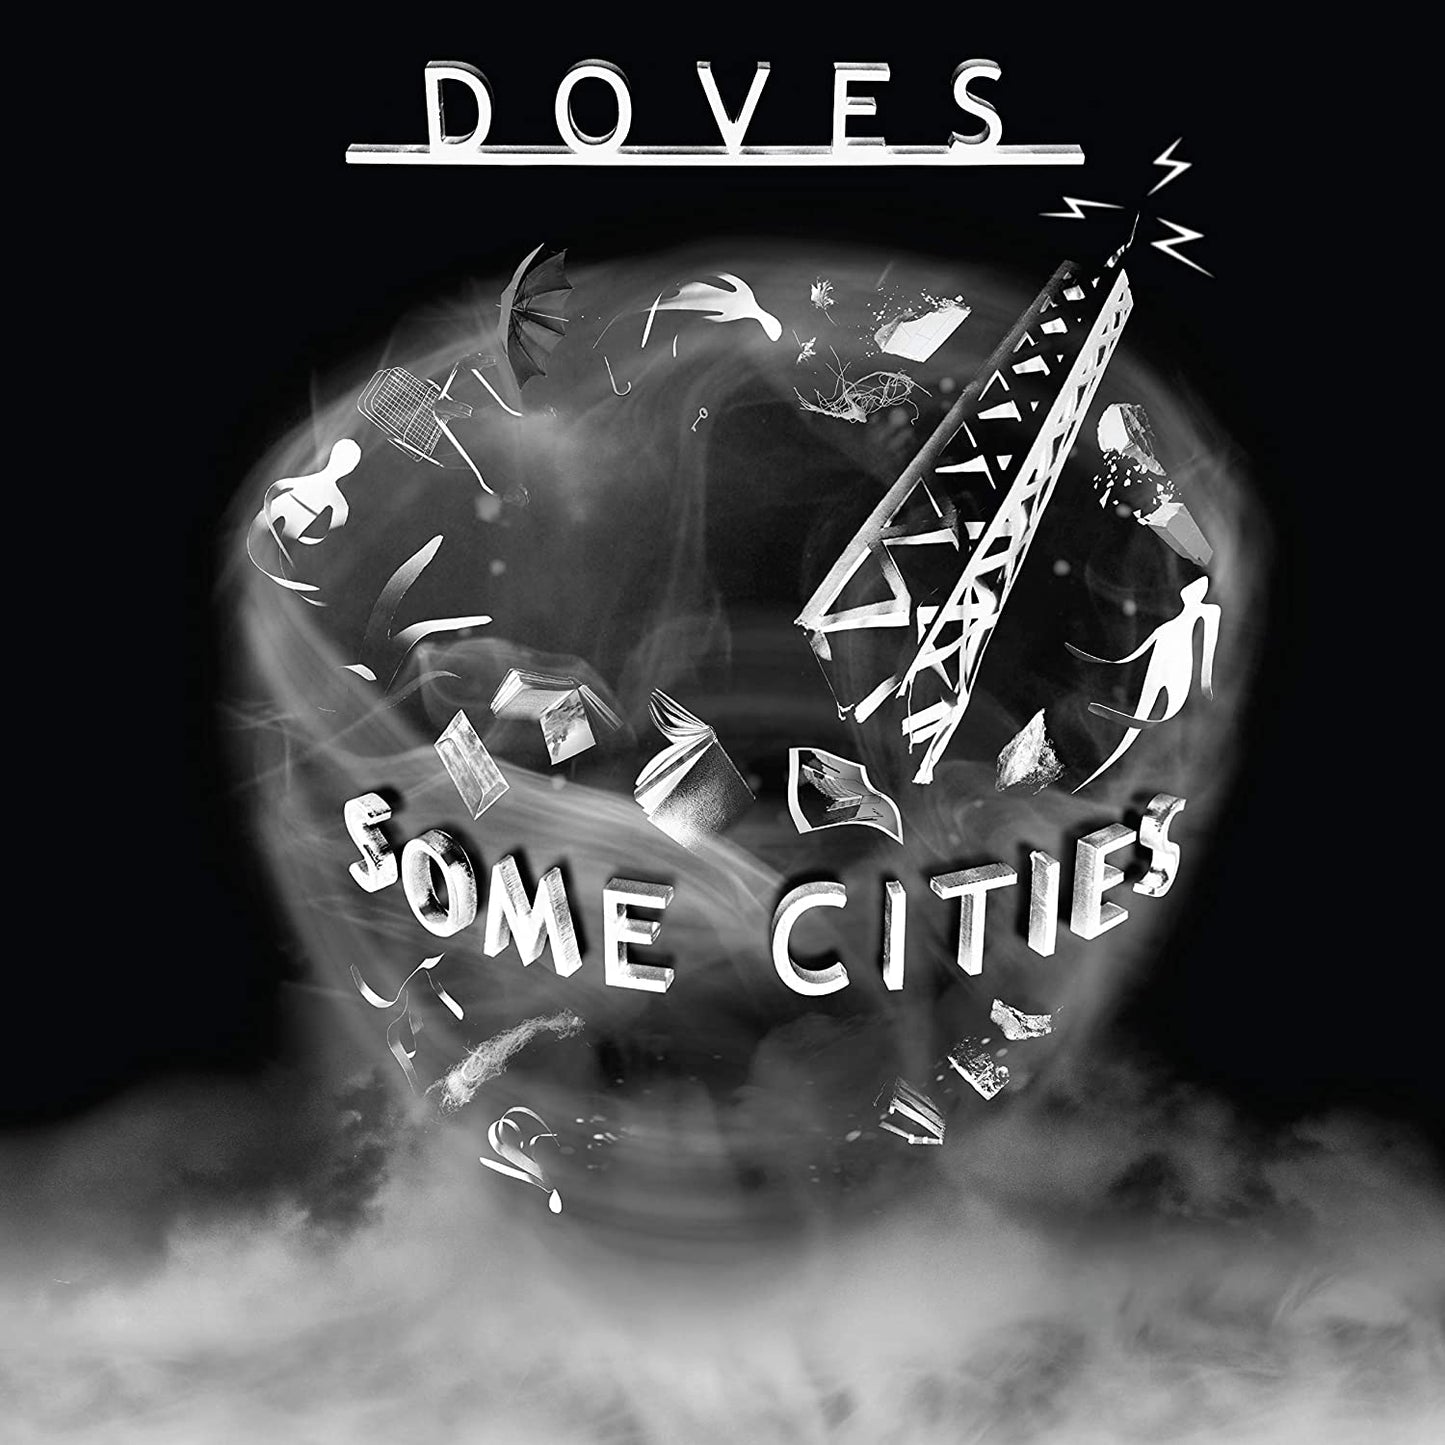 The Doves - Some Cities - LP